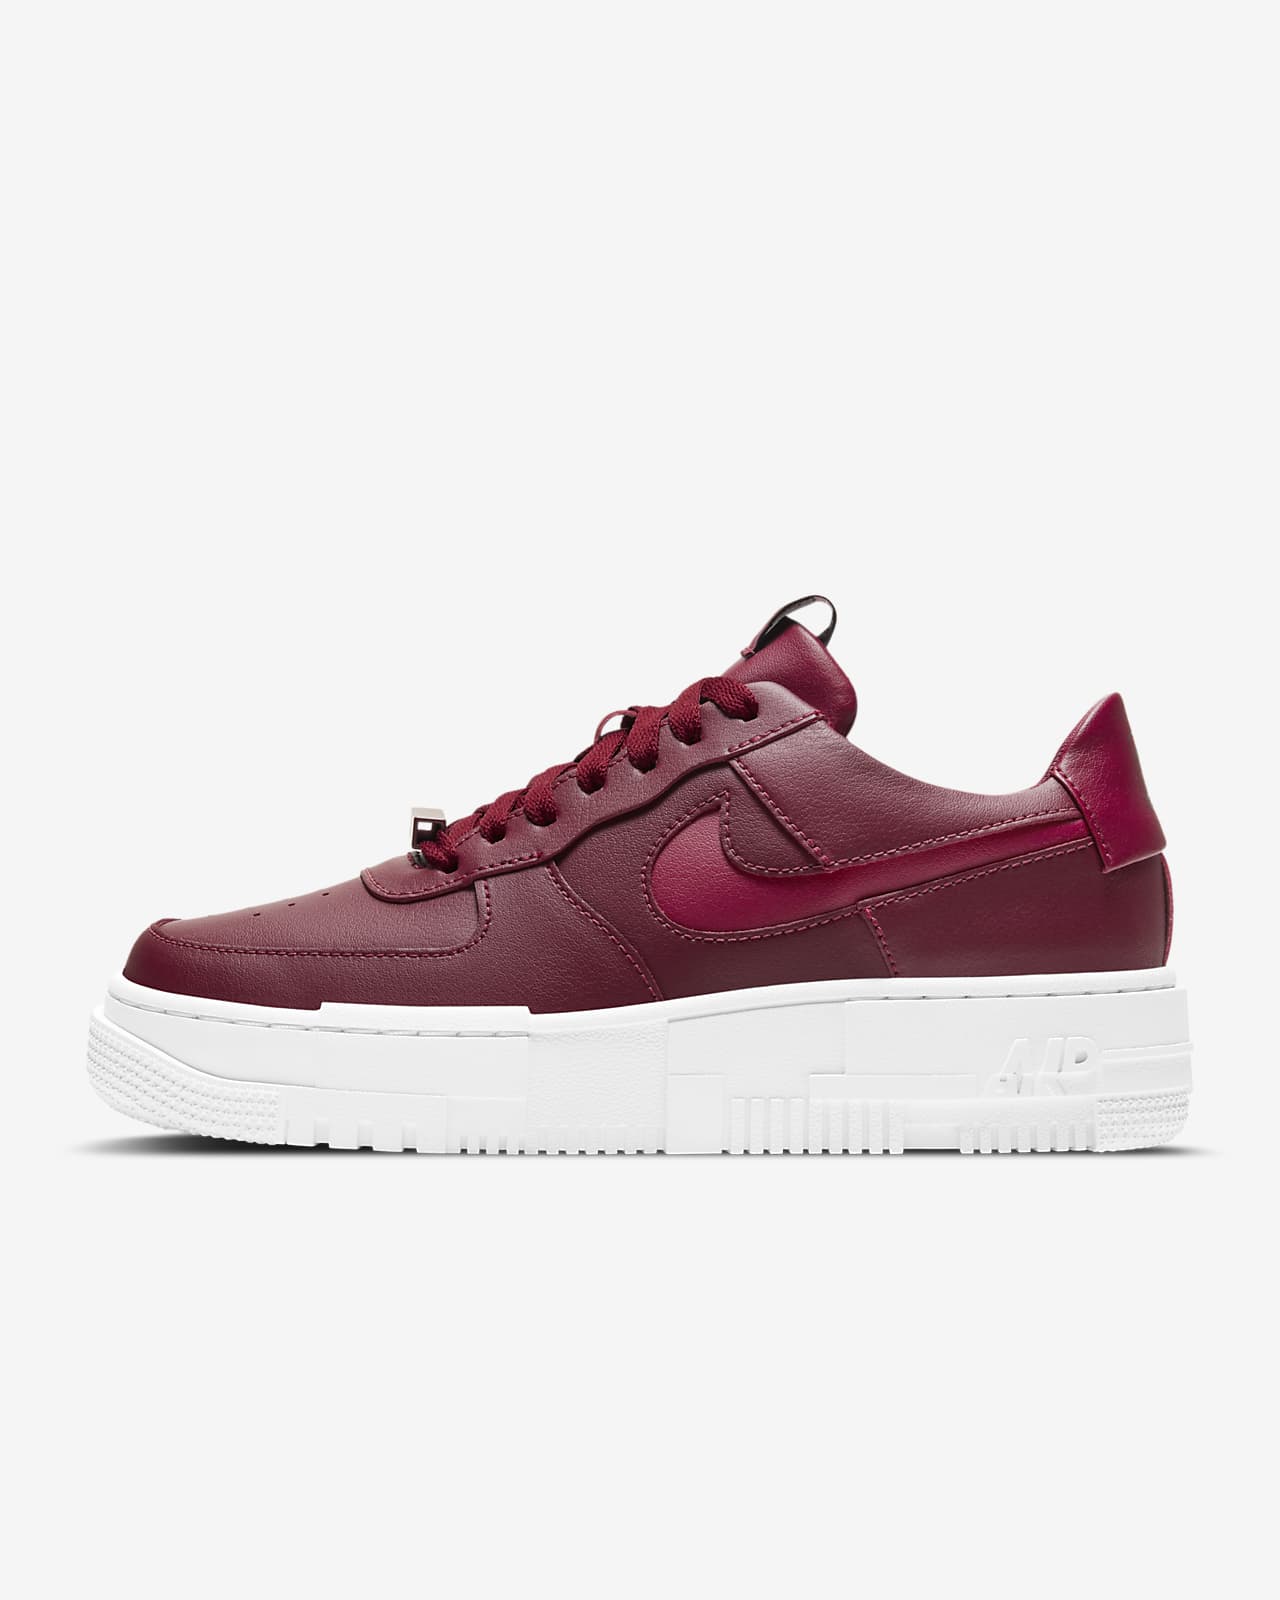 women red air force 1